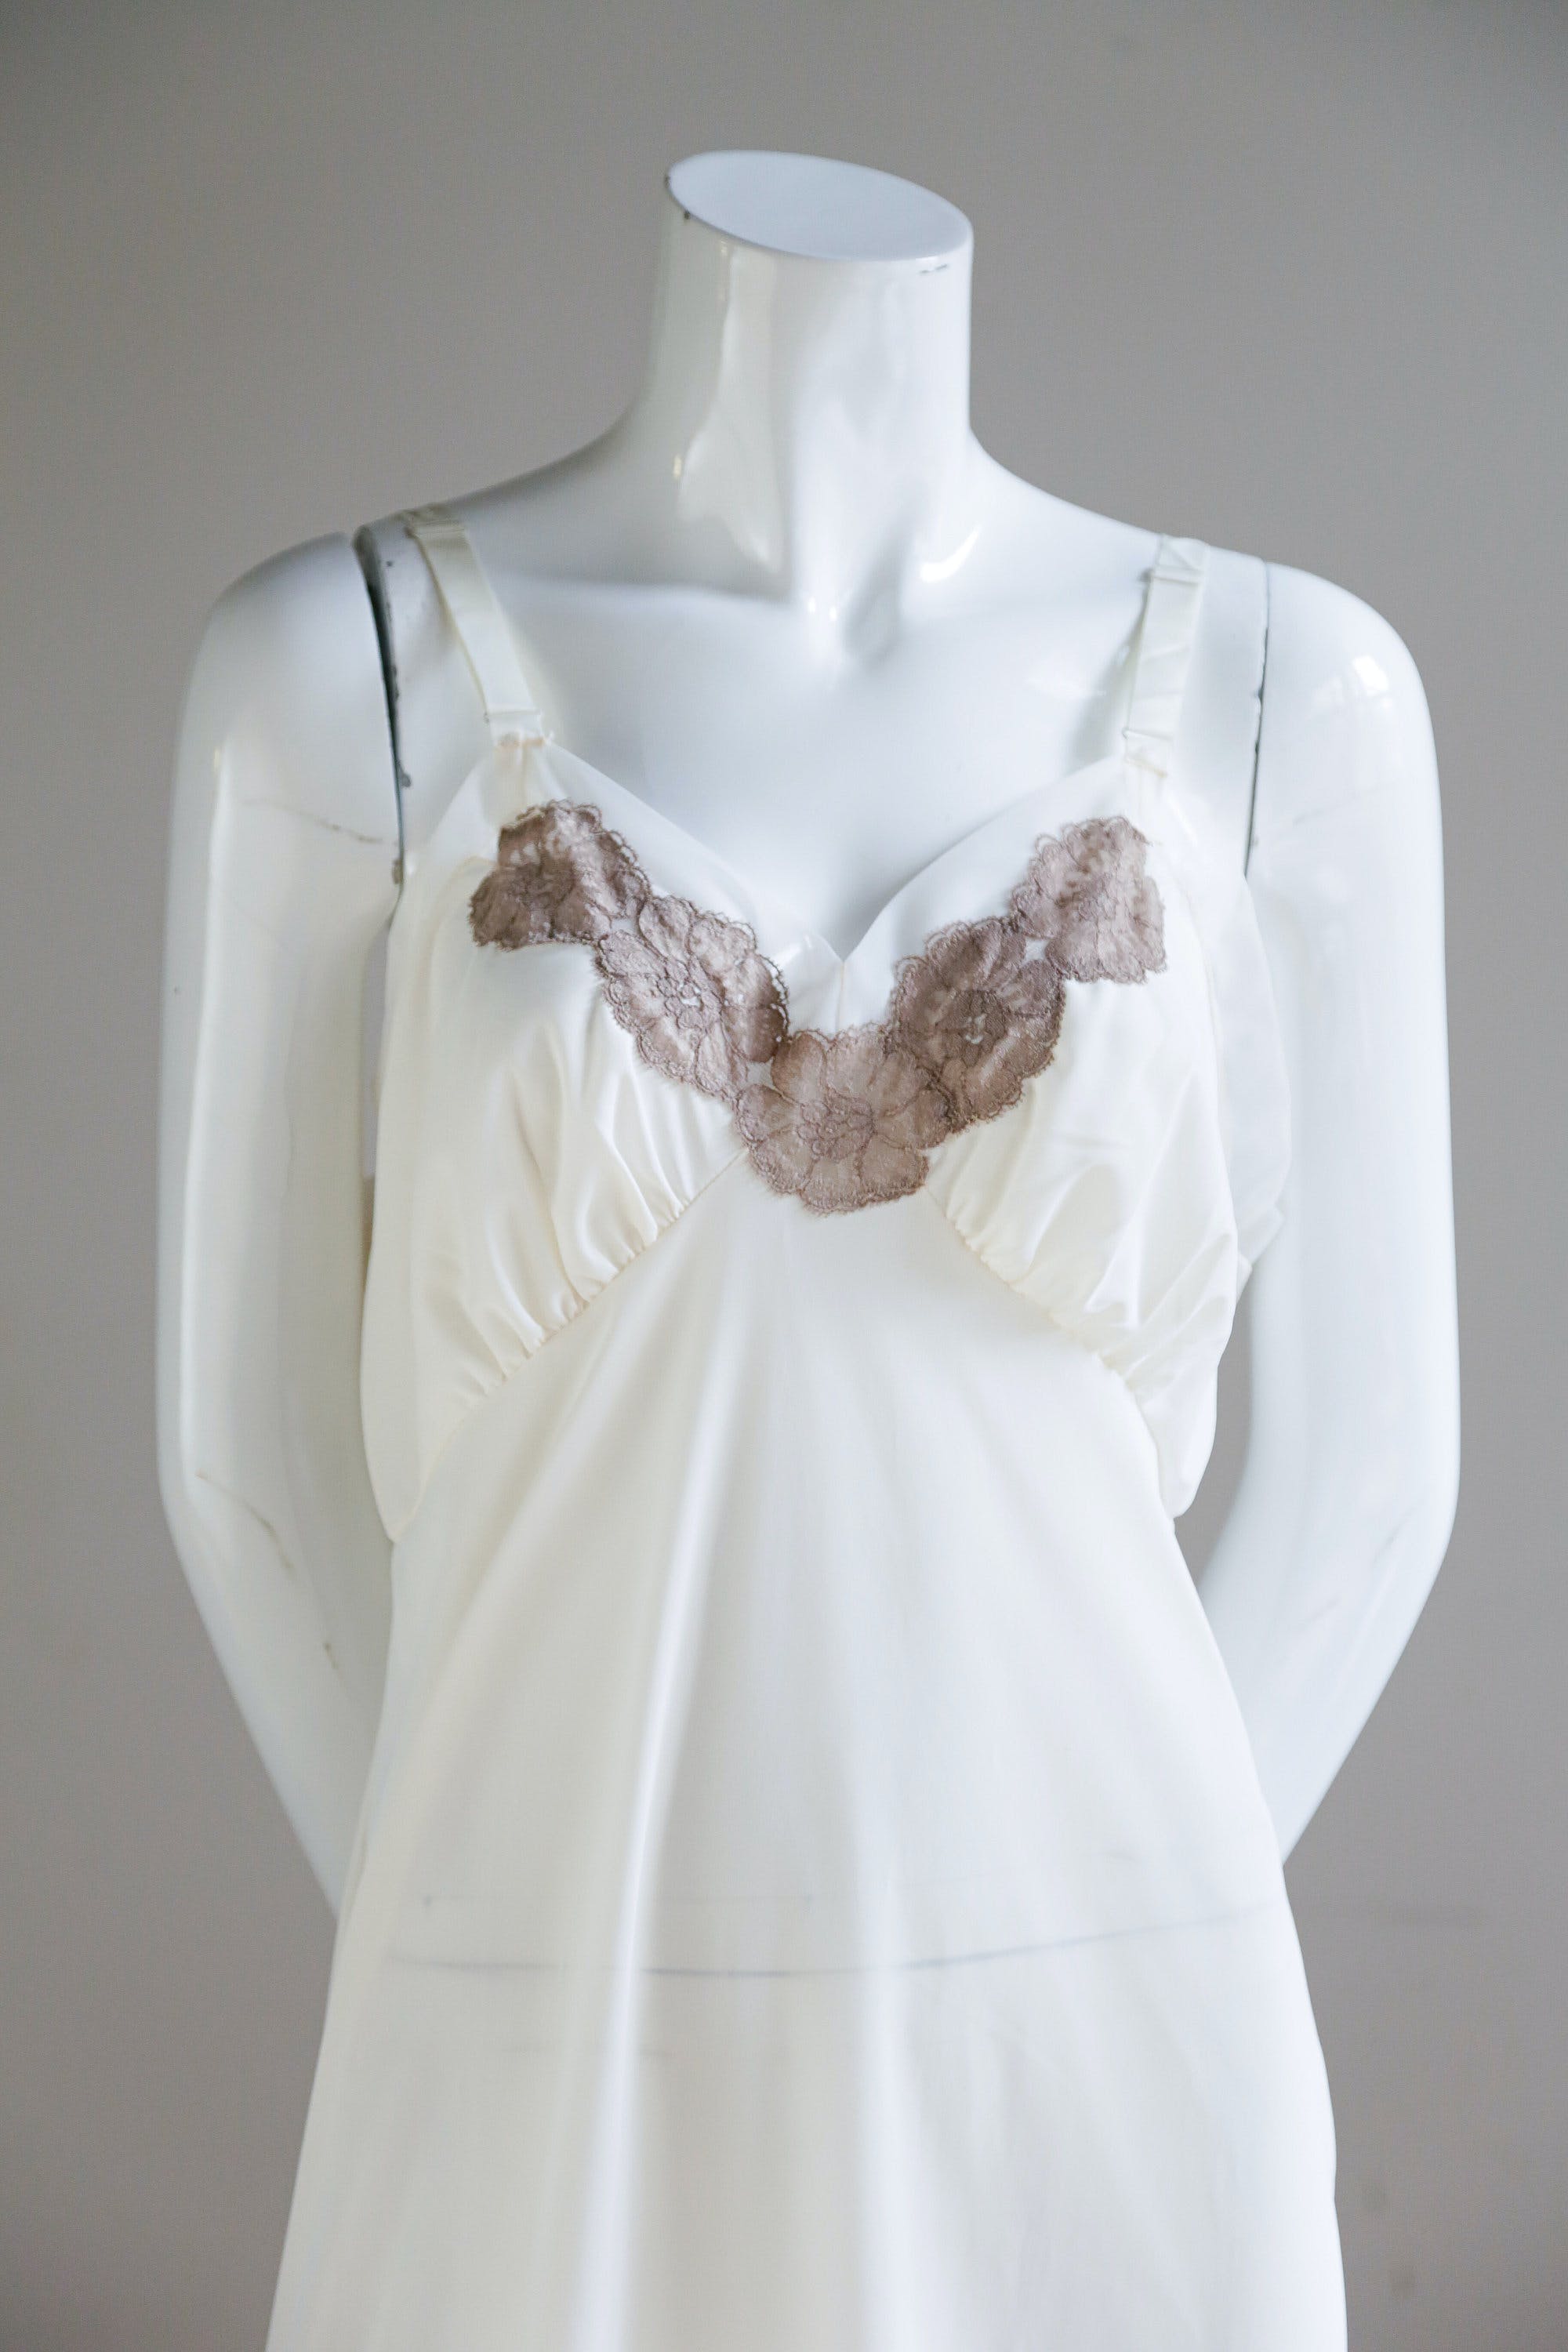 Vintage Light Peach Slip by French Maid Lingerie Company | Shop THRILLING